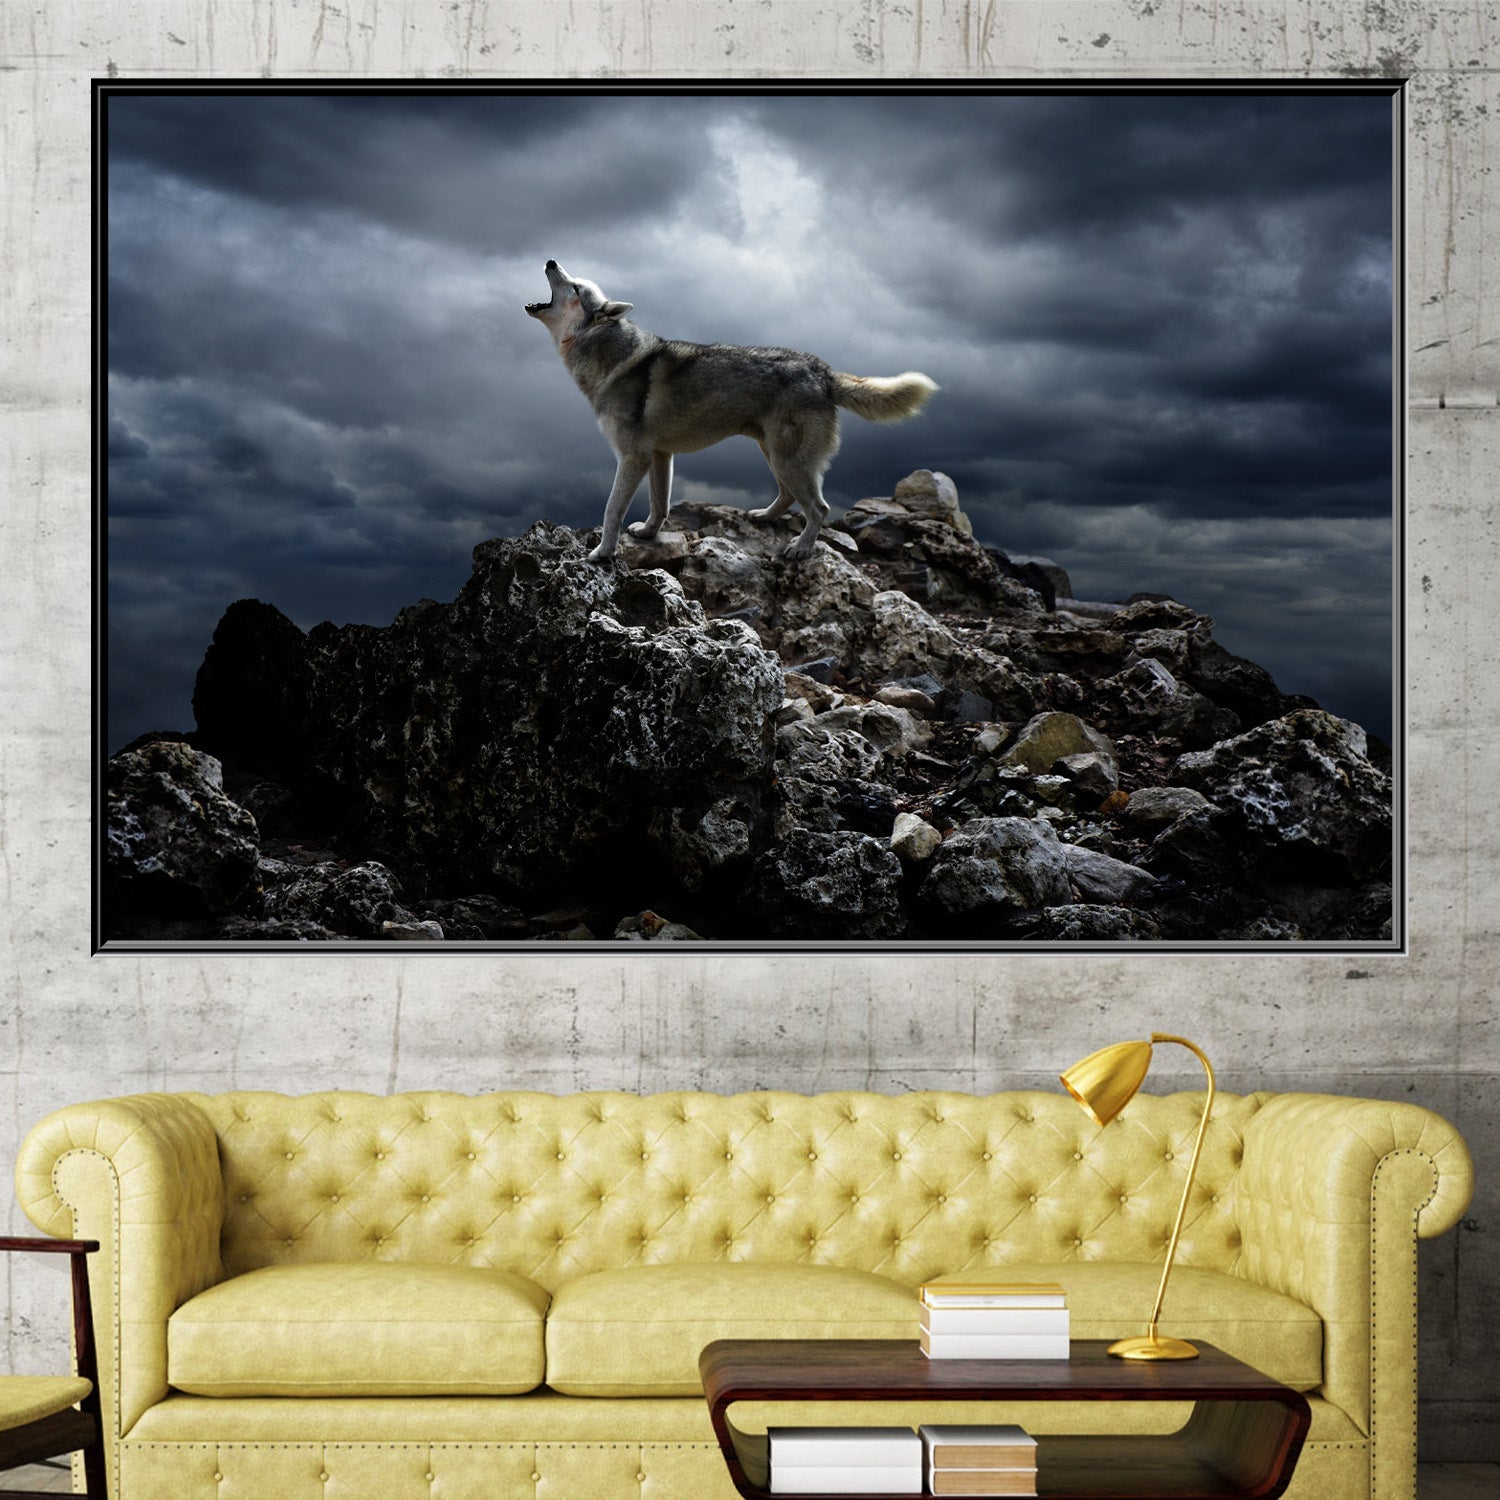 https://cdn.shopify.com/s/files/1/0387/9986/8044/products/SongoftheWolfCanvasArtprintStretched-4.jpg